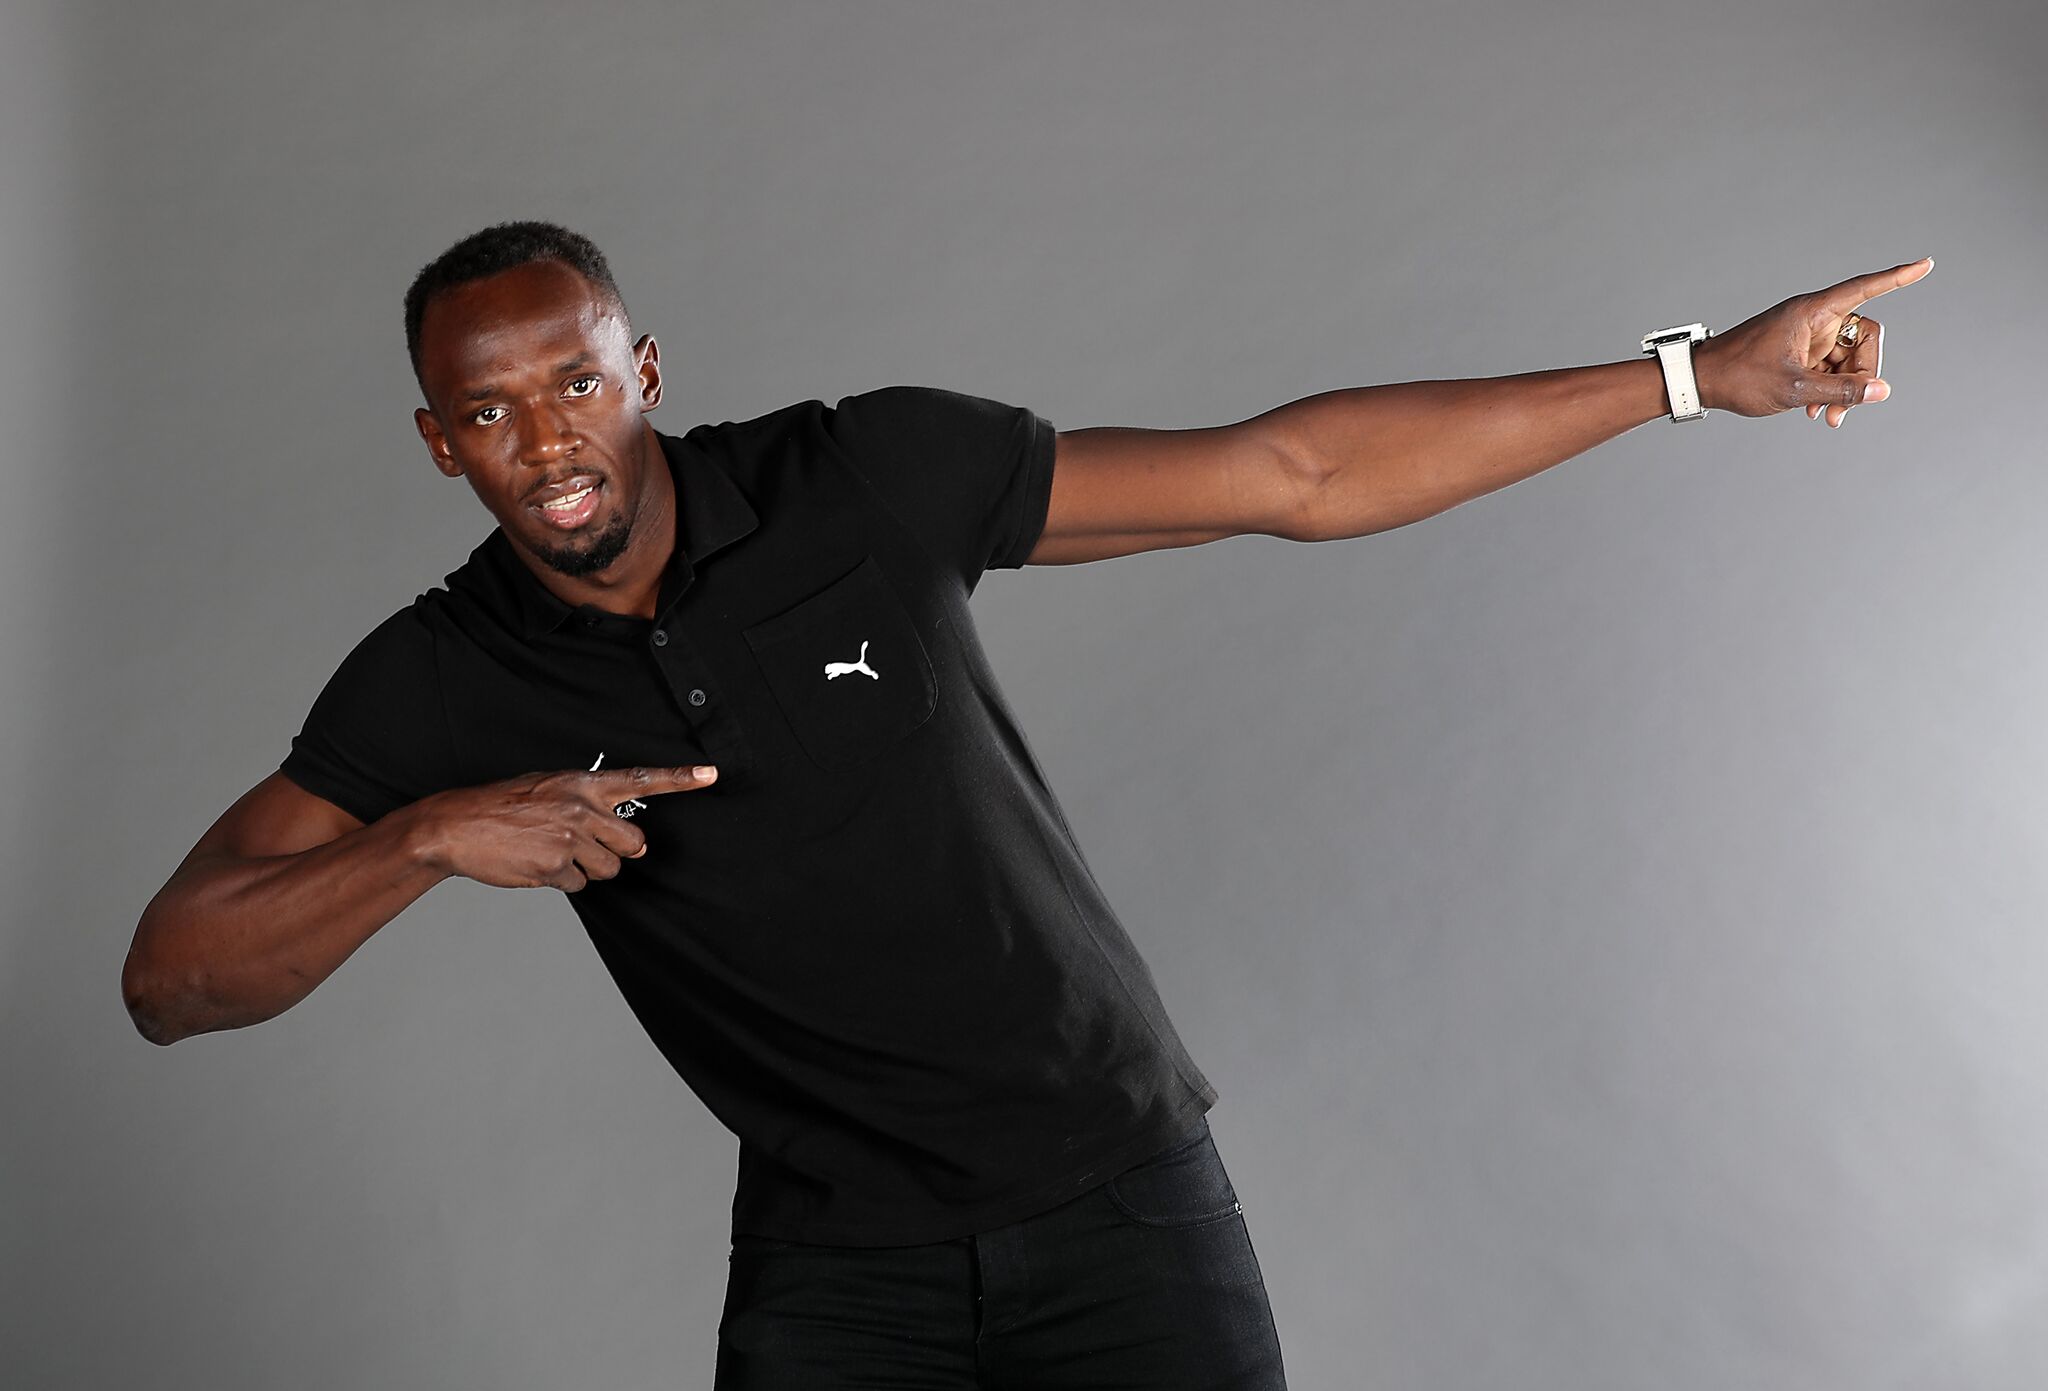 Bolt might discourage child from being an athlete